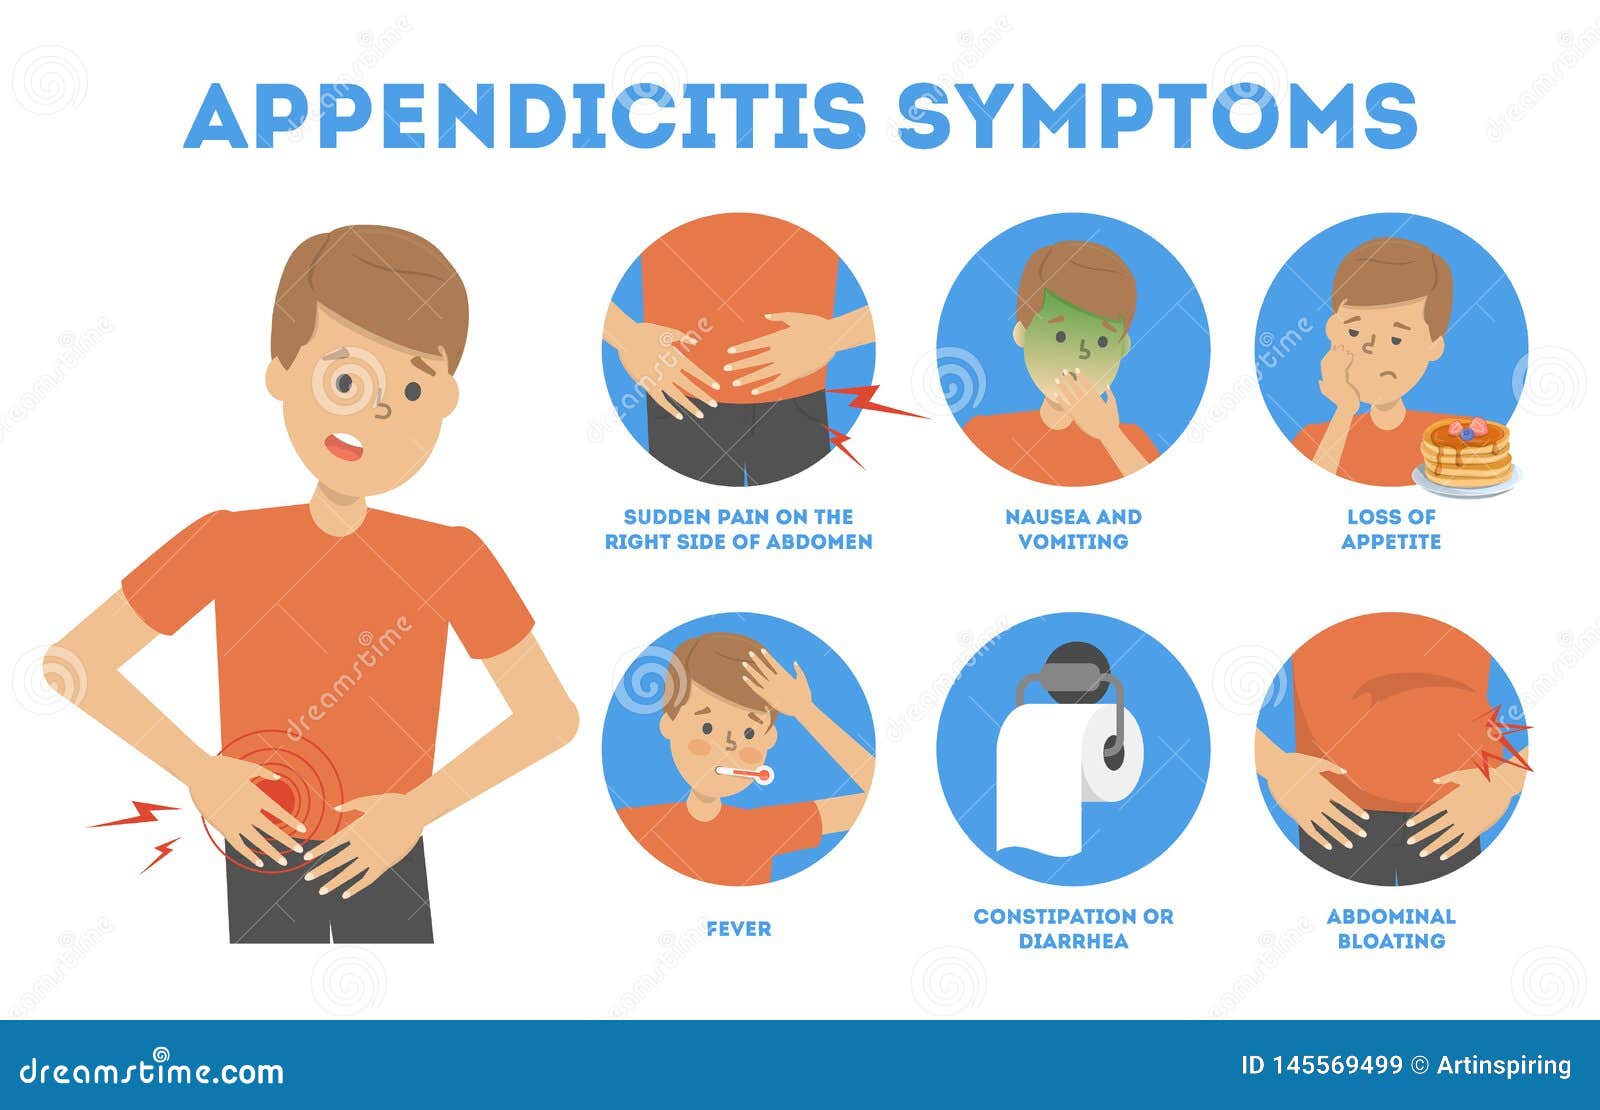 Appendicitis Inflammation Of The Appendix Colon The Illustration On